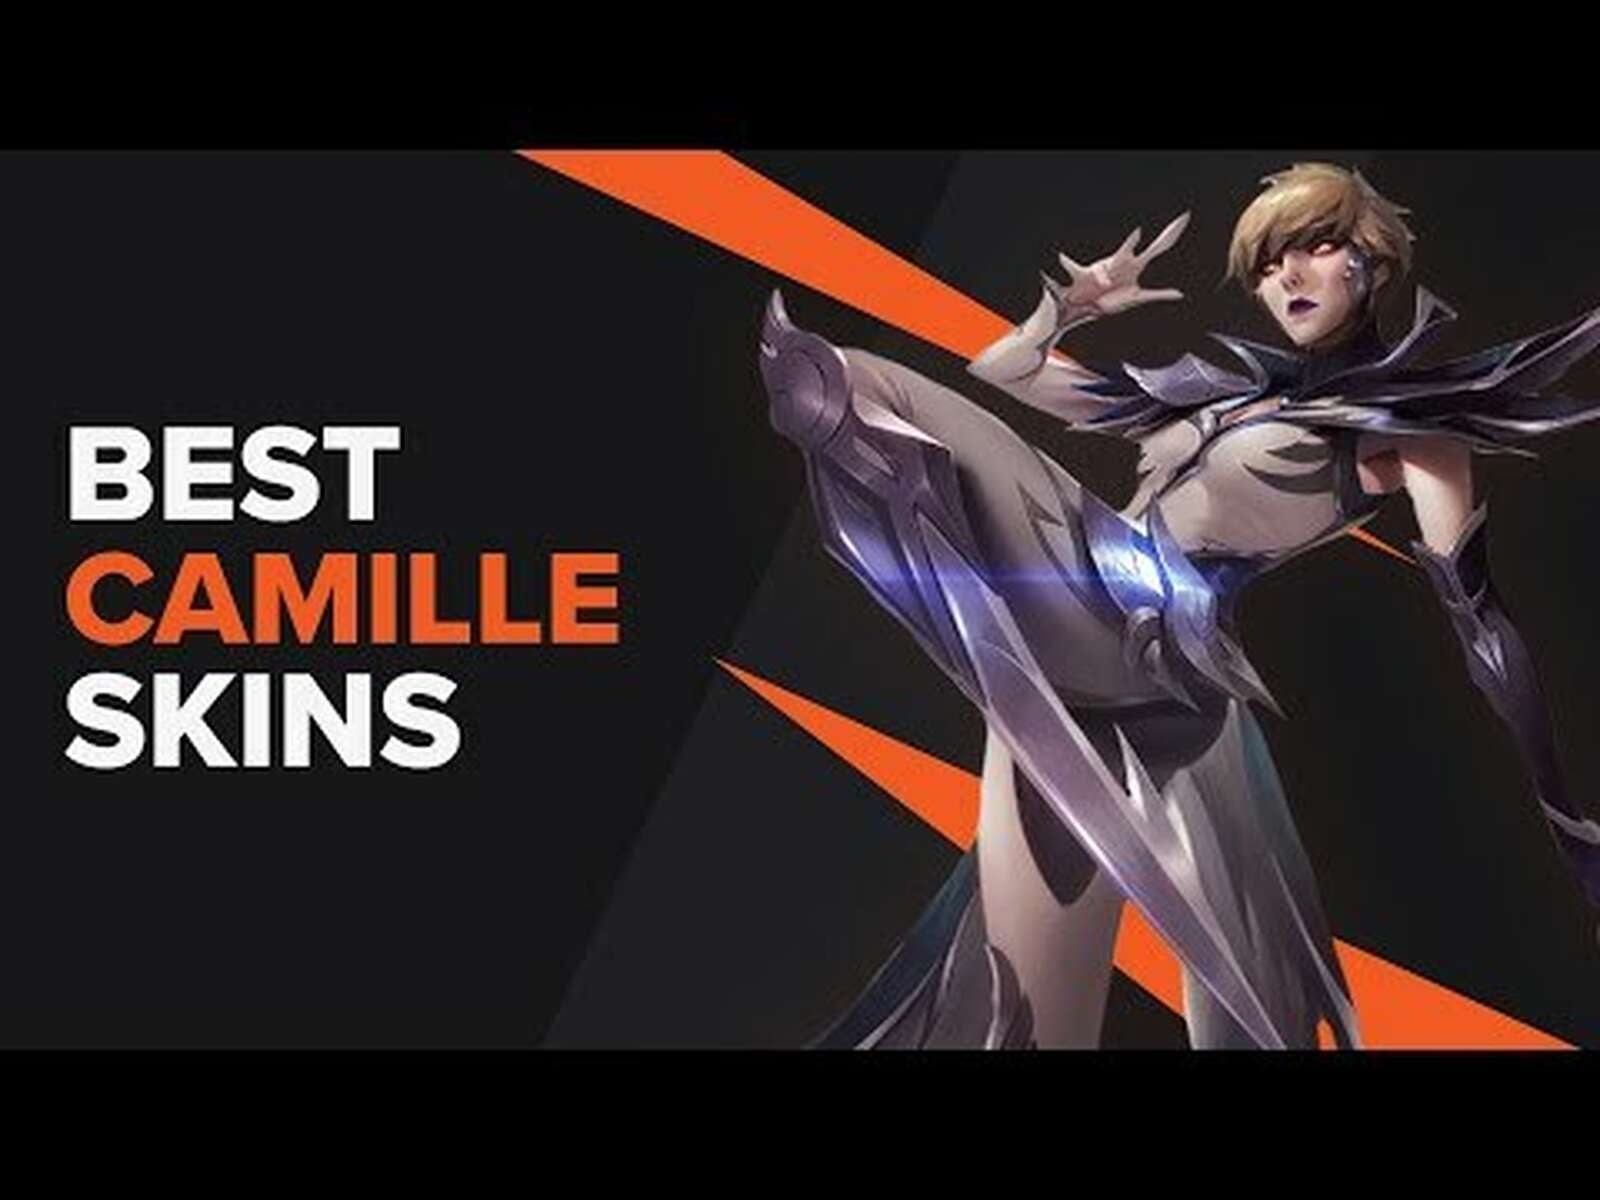 The Best Camille Skins in League of Legends